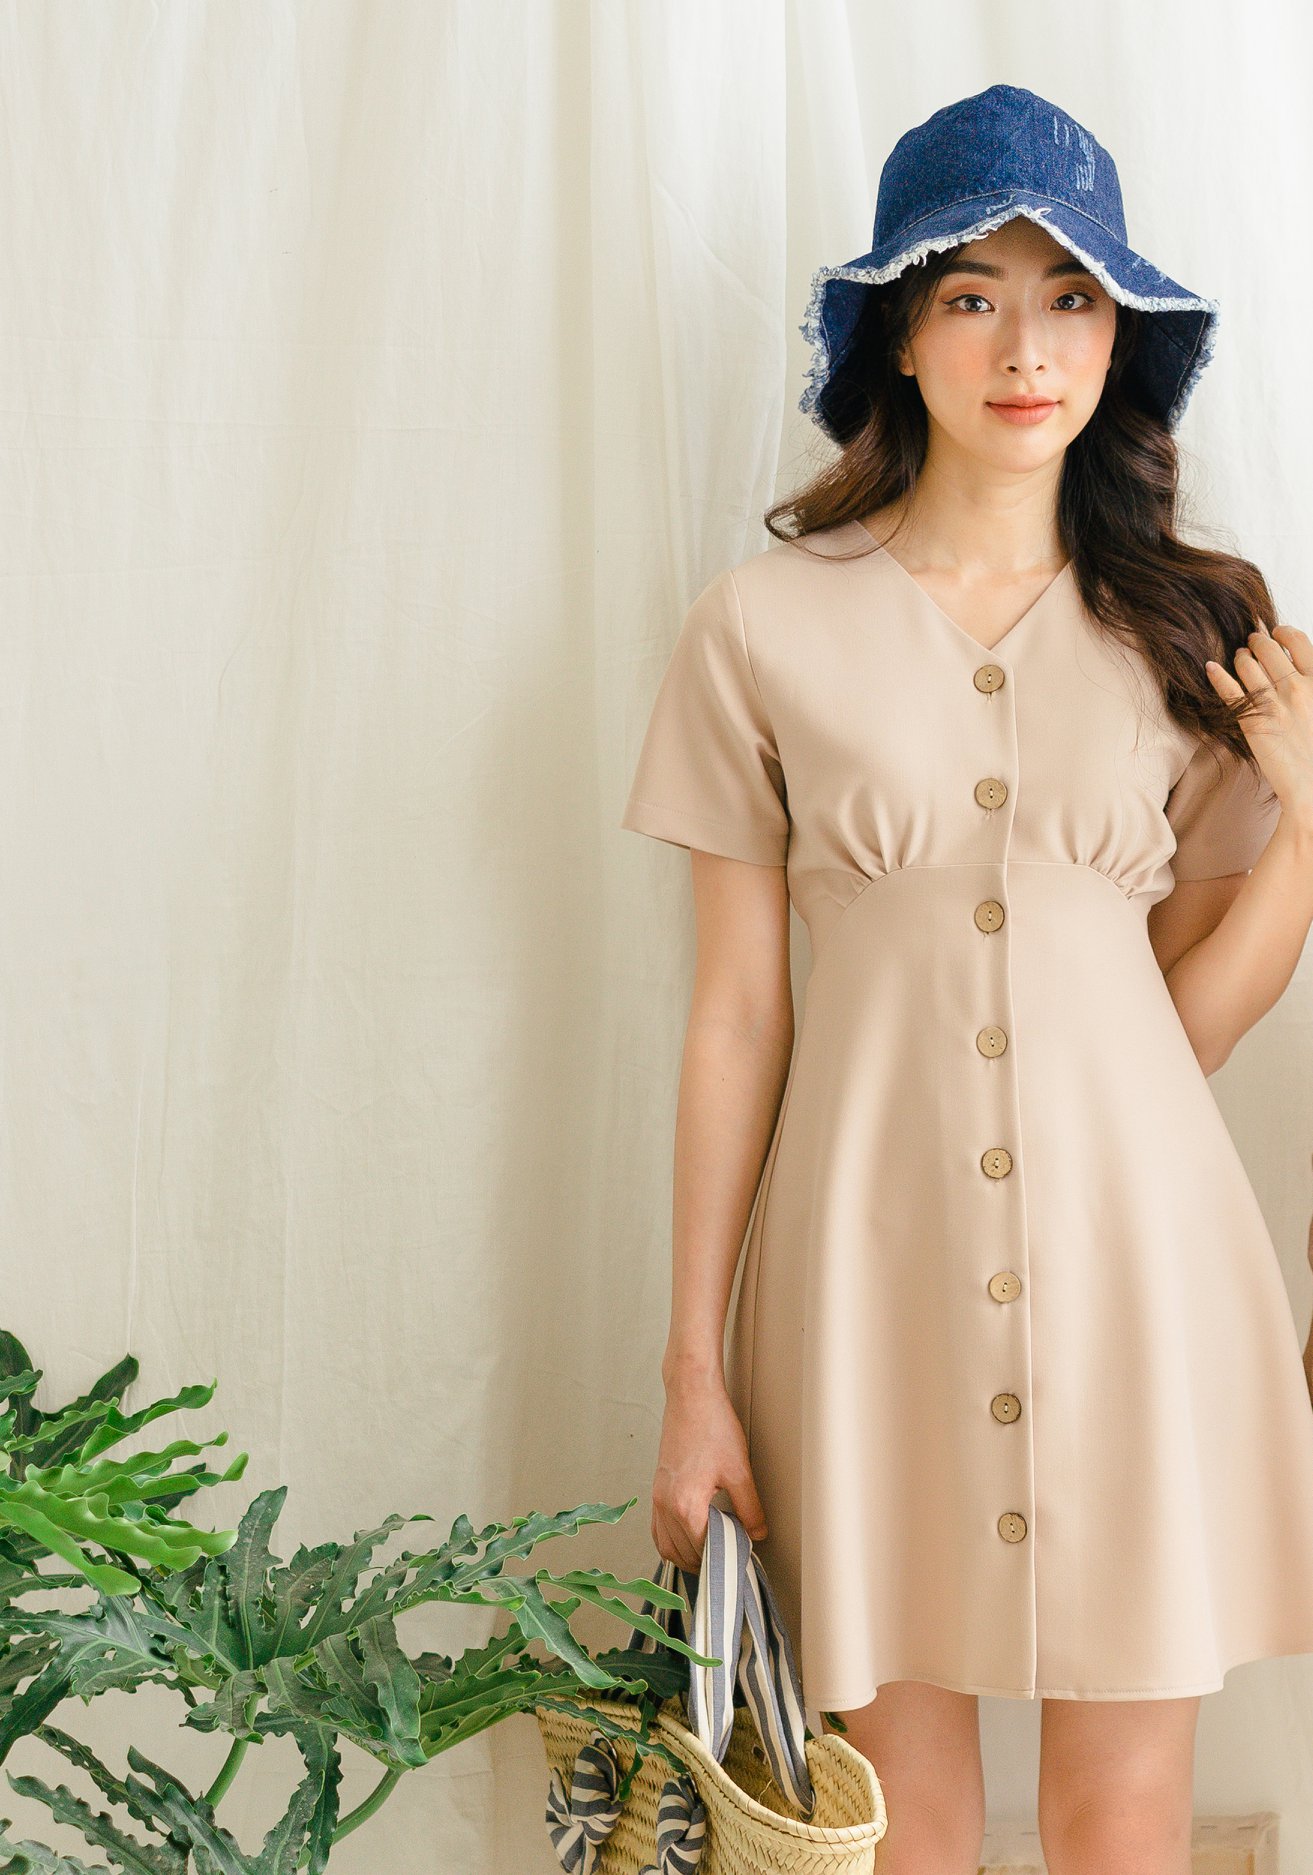 MIKI FOR WOMAN – DRESS COLLECTION